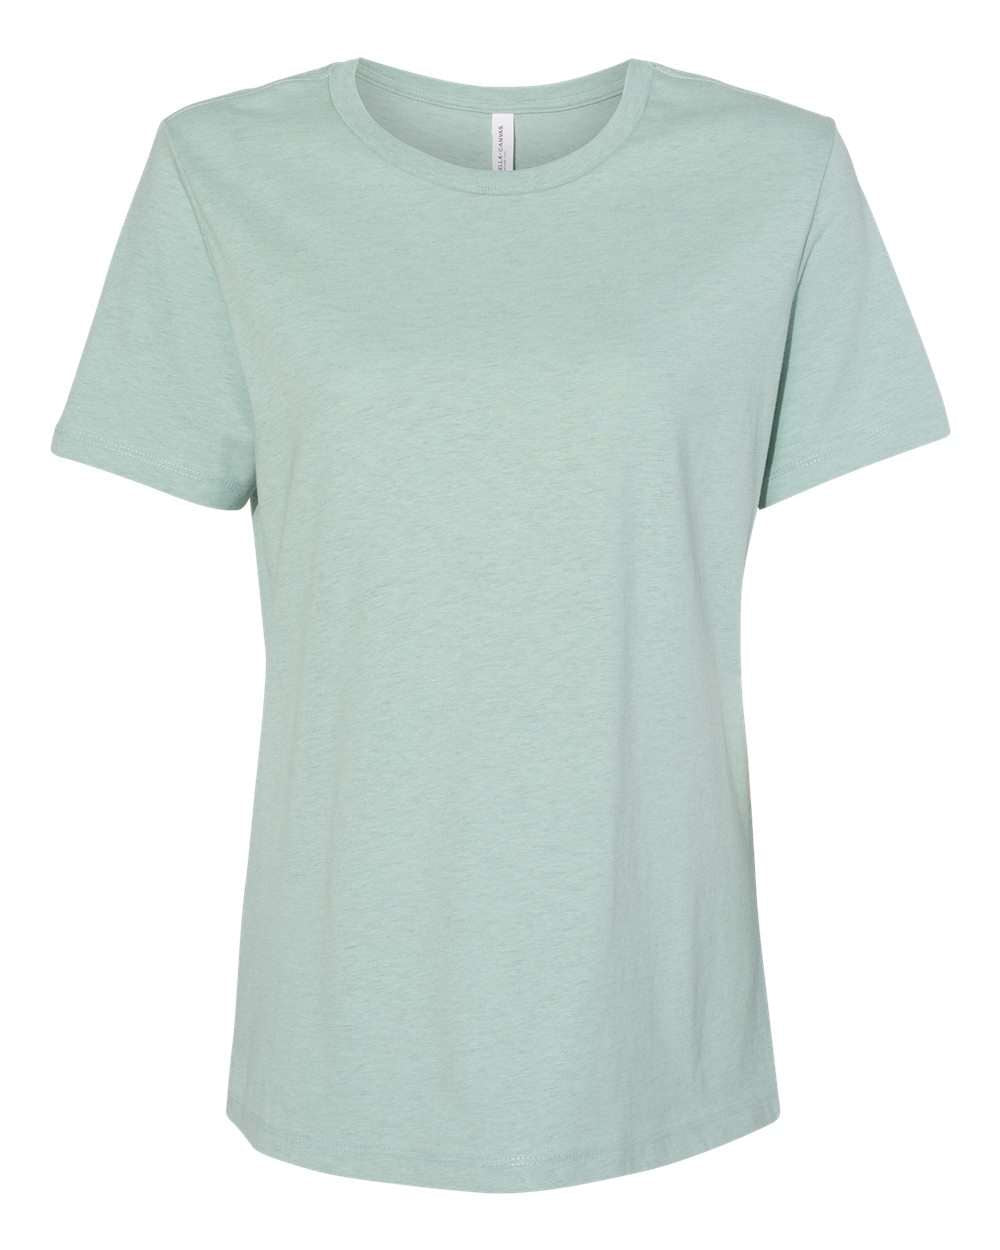 bella+canvas womens relaxed cvc tee heather prism dusty blue